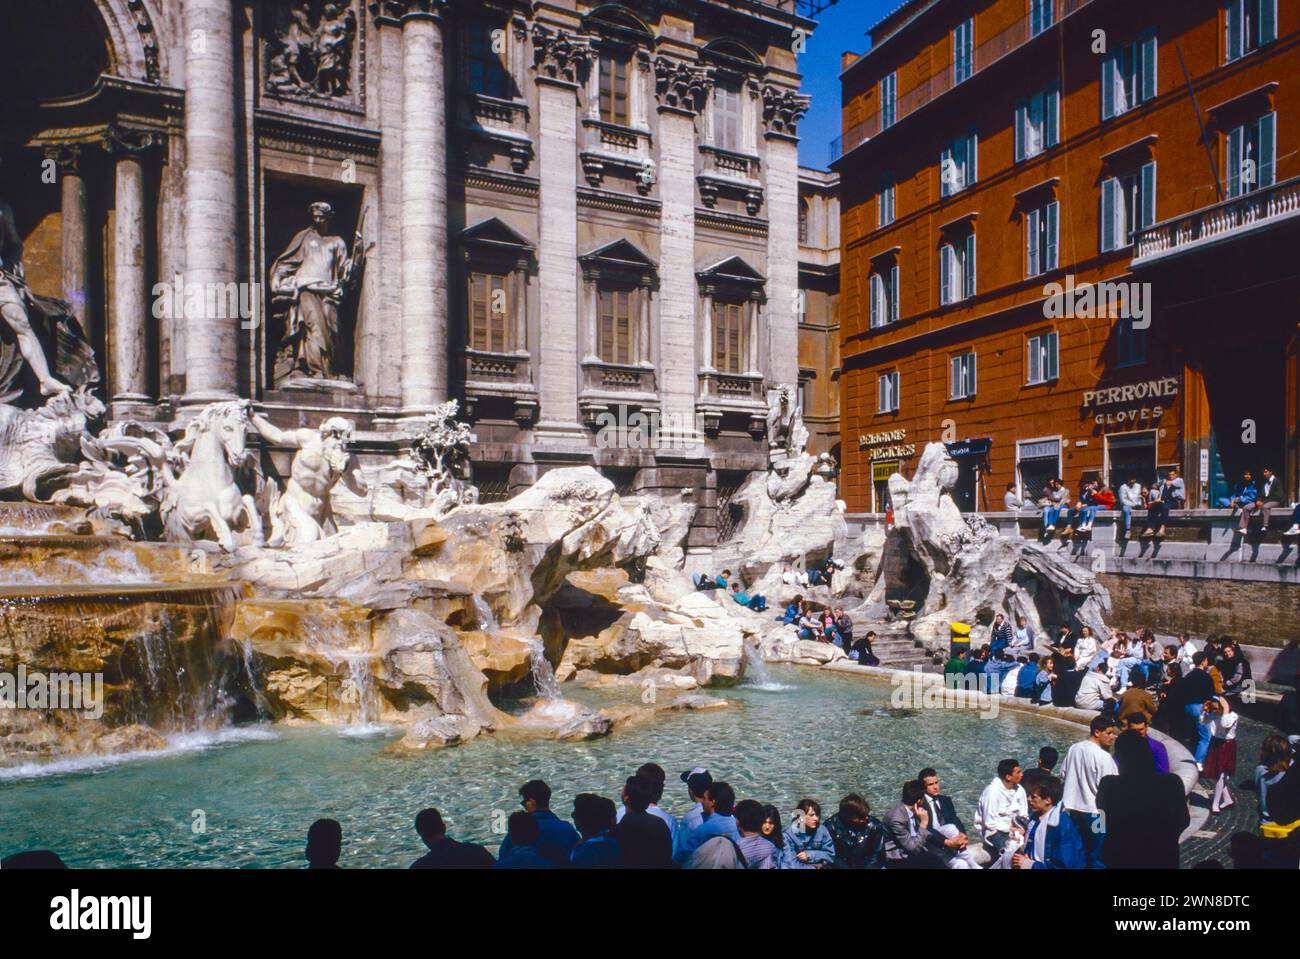 Marble sculptures in the famous Trevi Fountain in Rome, Italy. Stock Photo